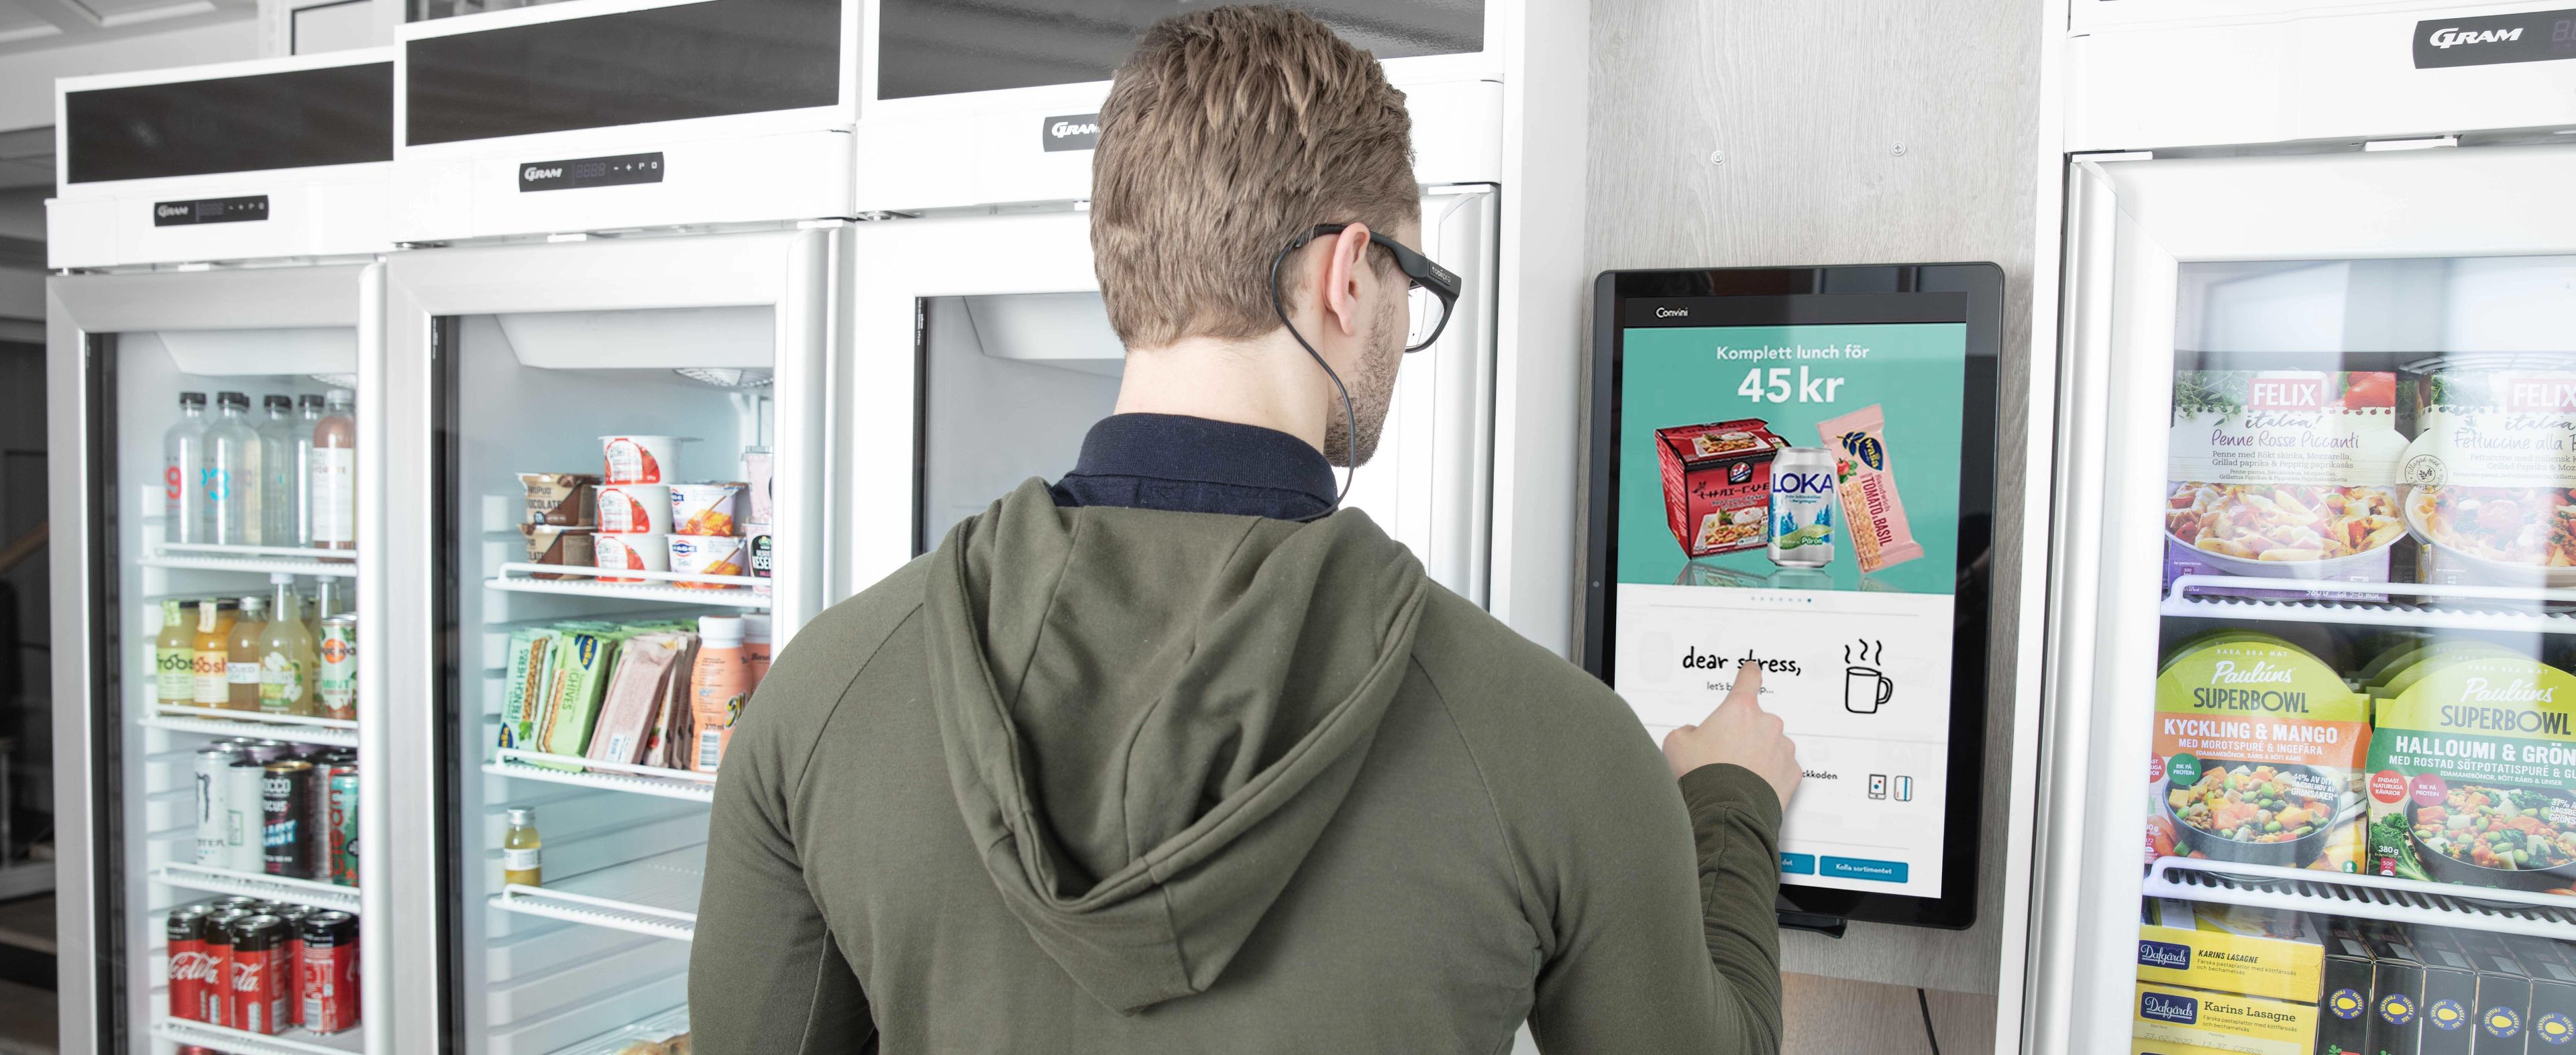 Man wearing Glasses 3 to purchase vending machine food